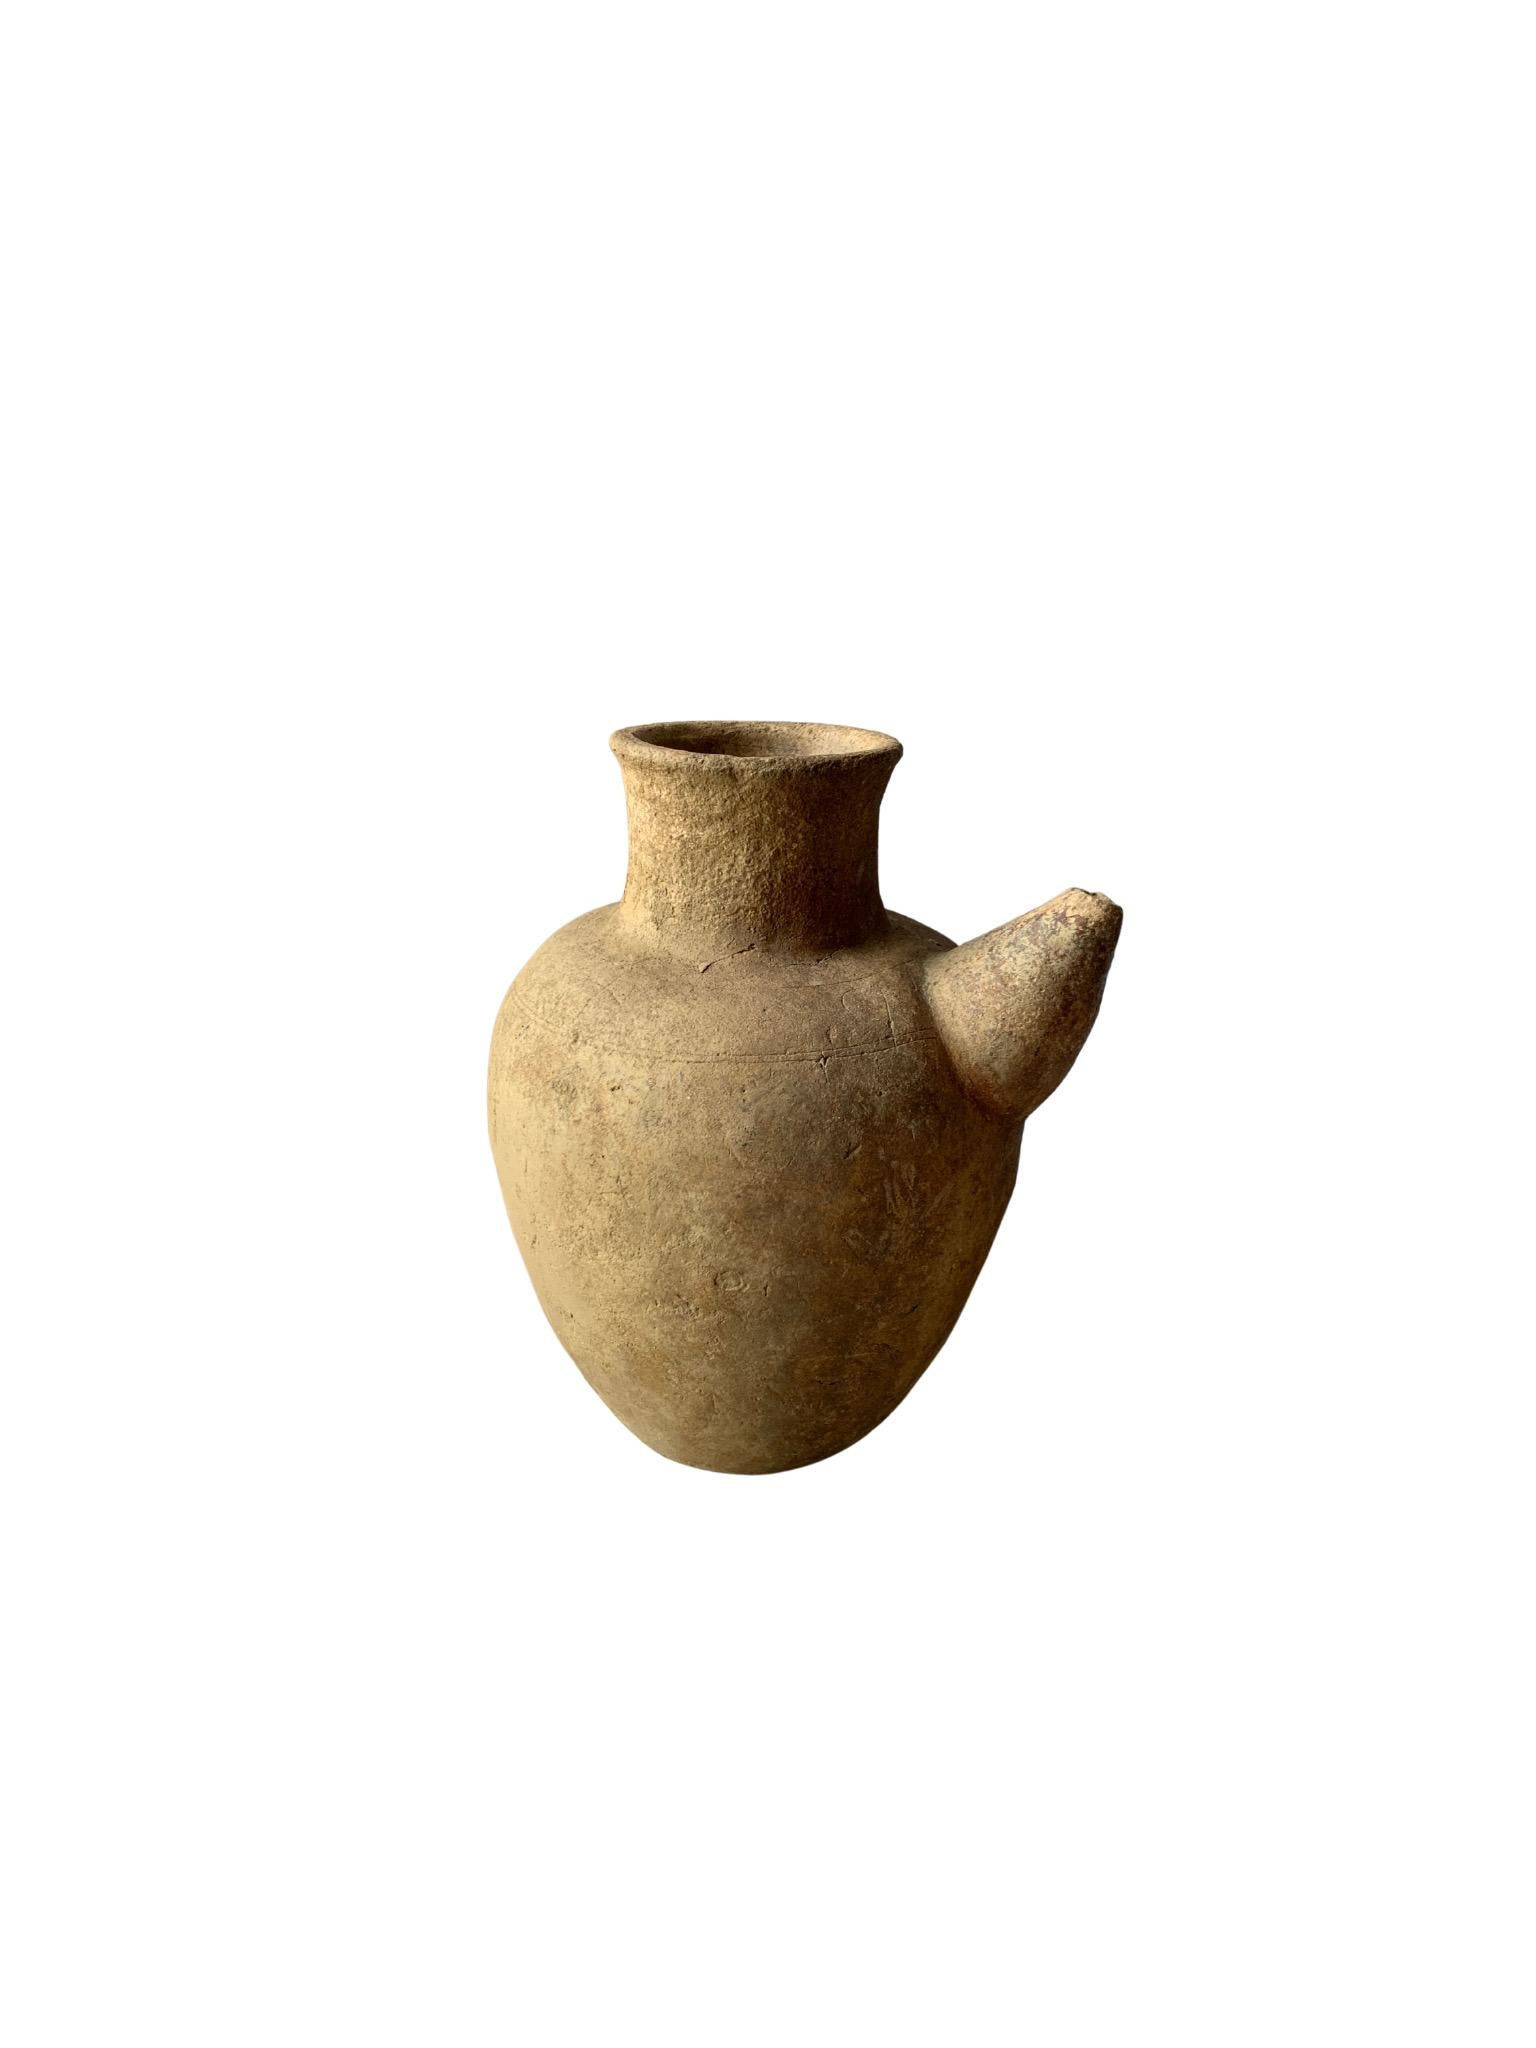 Indonesian Terracotta Jar from Java, Indonesia c. 1900 For Sale